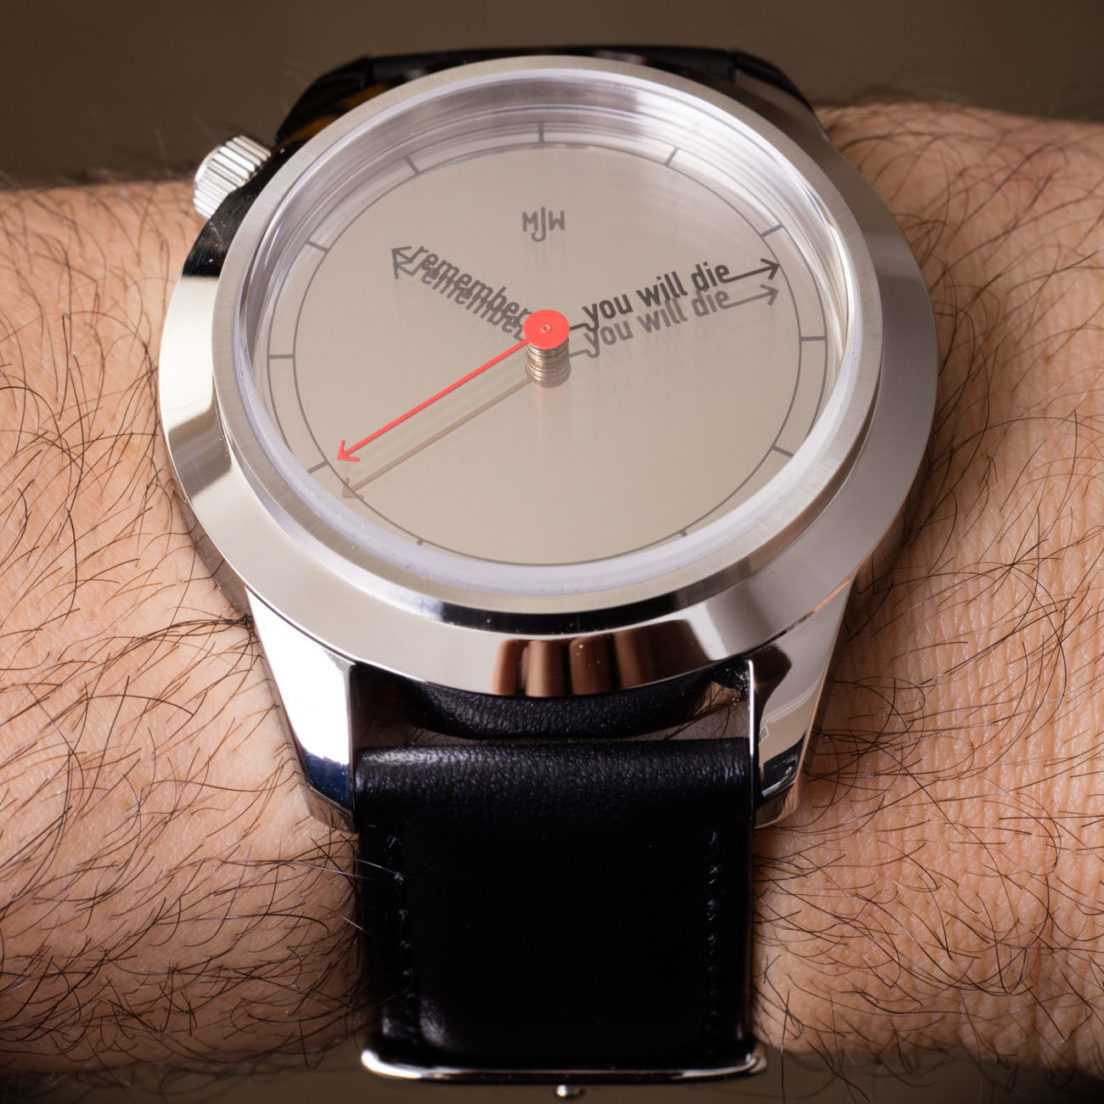 Hands-On: Mr. Jones Watch The Accurate XL With 'Remember You Will Die ...